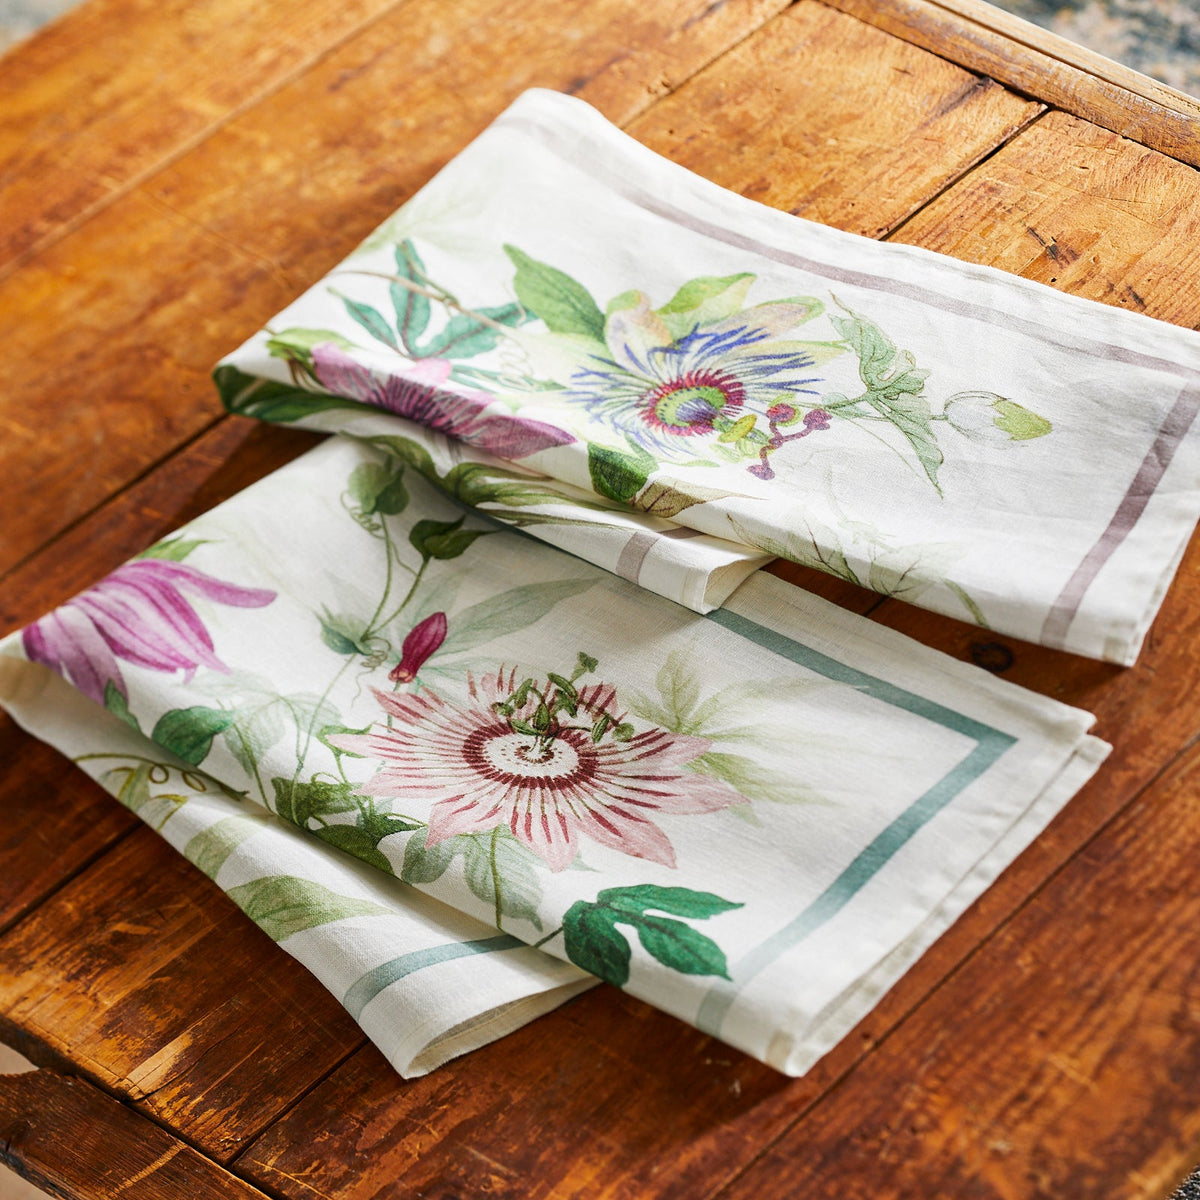 Two Passionflower Linen Kitchen Towels Set/2 with passionflowers on them on a wooden table. (Brand Name: TTT)